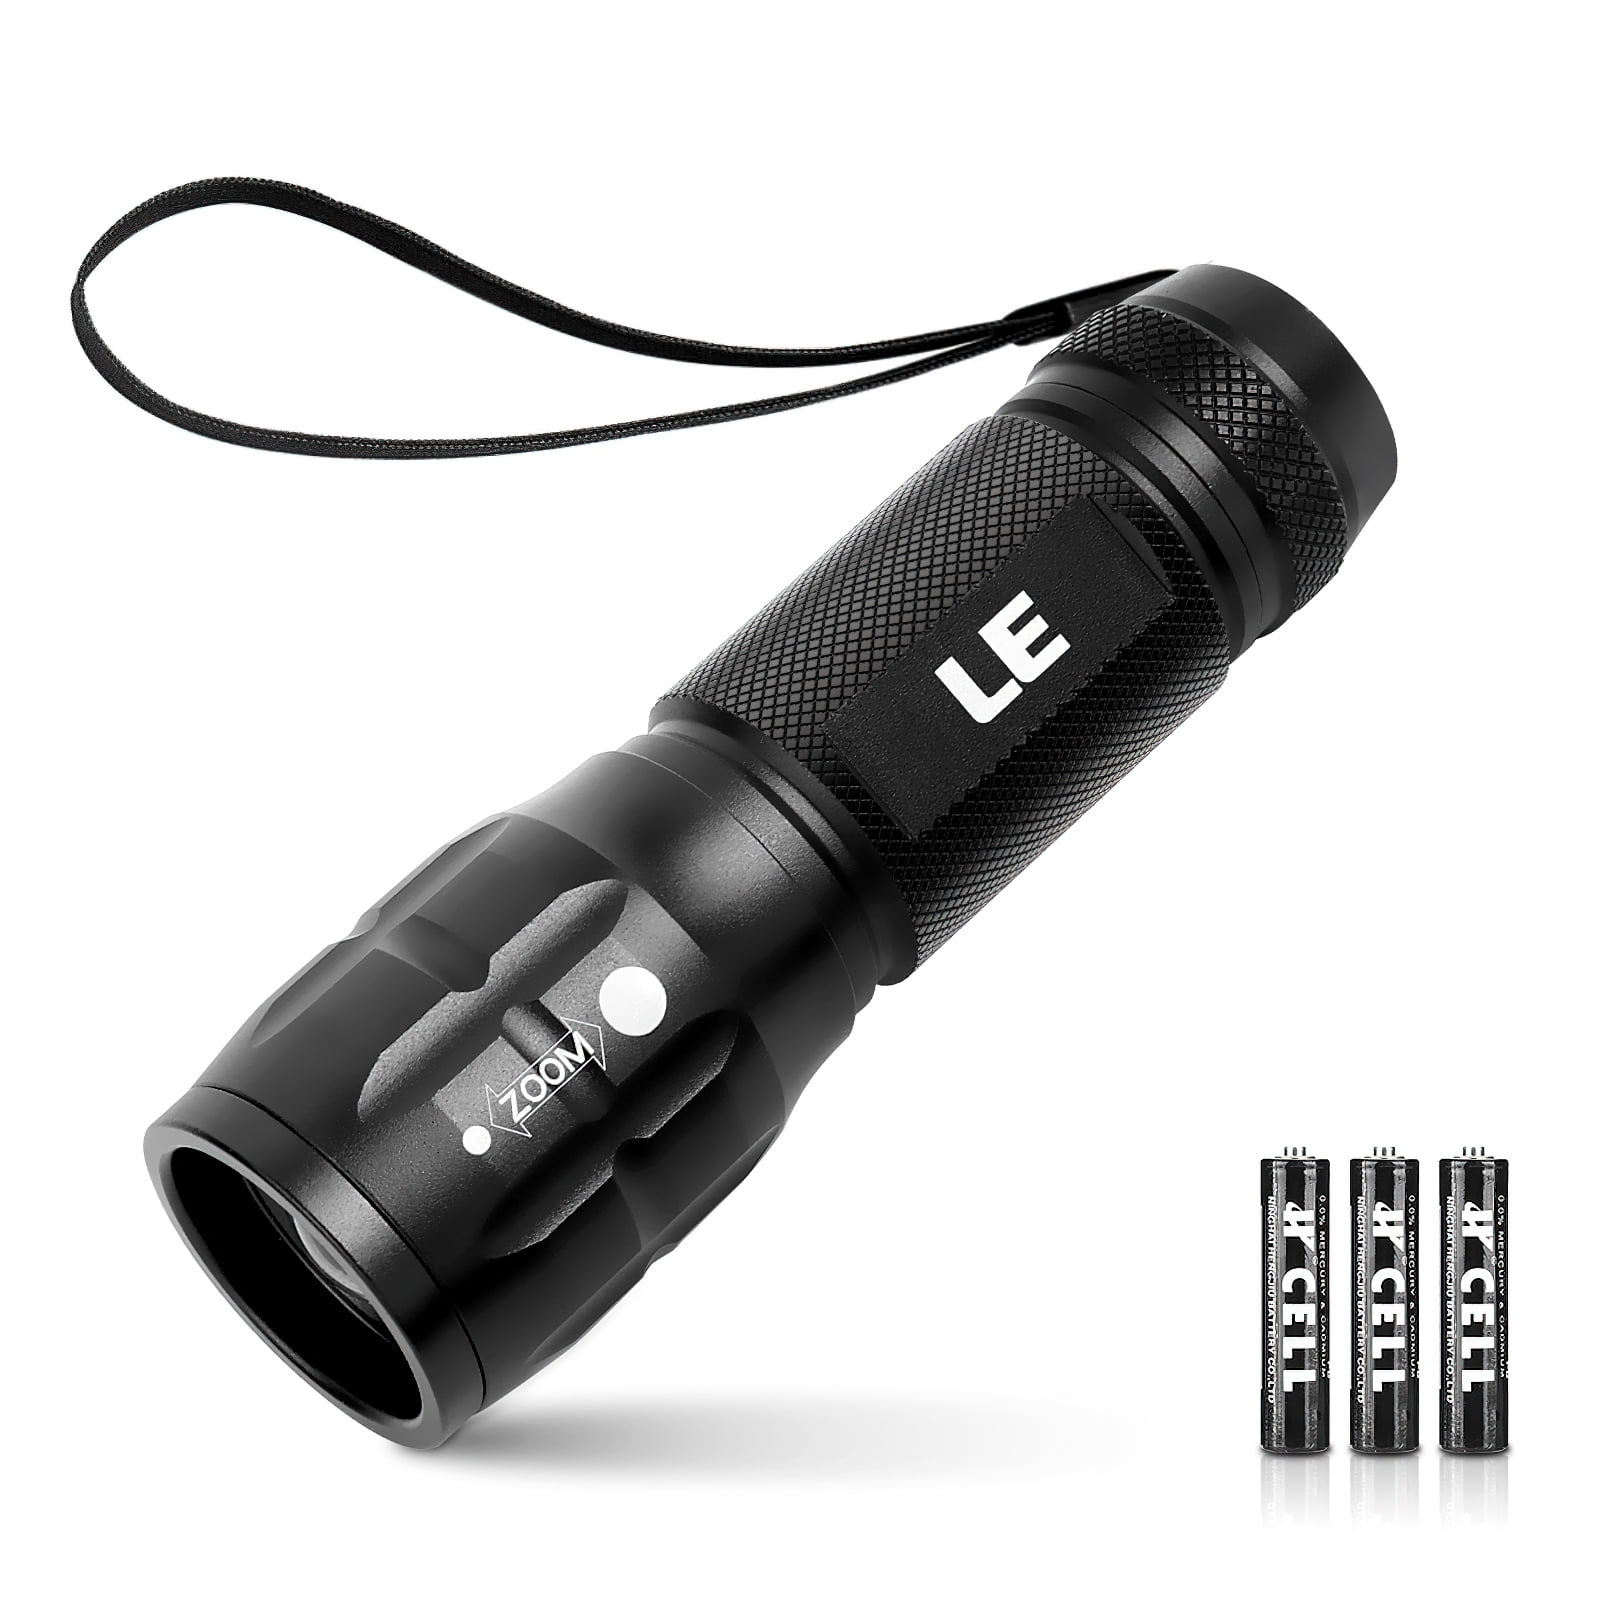 Flere teleskop metan LE LED Flashlights LE1000 High Lumens, Bright Small Flashlight, Zoomable,  Waterproof, Adjustable Brightness Flash Light for Outdoor, Emergency, AAA  Batteries Included, Camping Accessories - Walmart.com